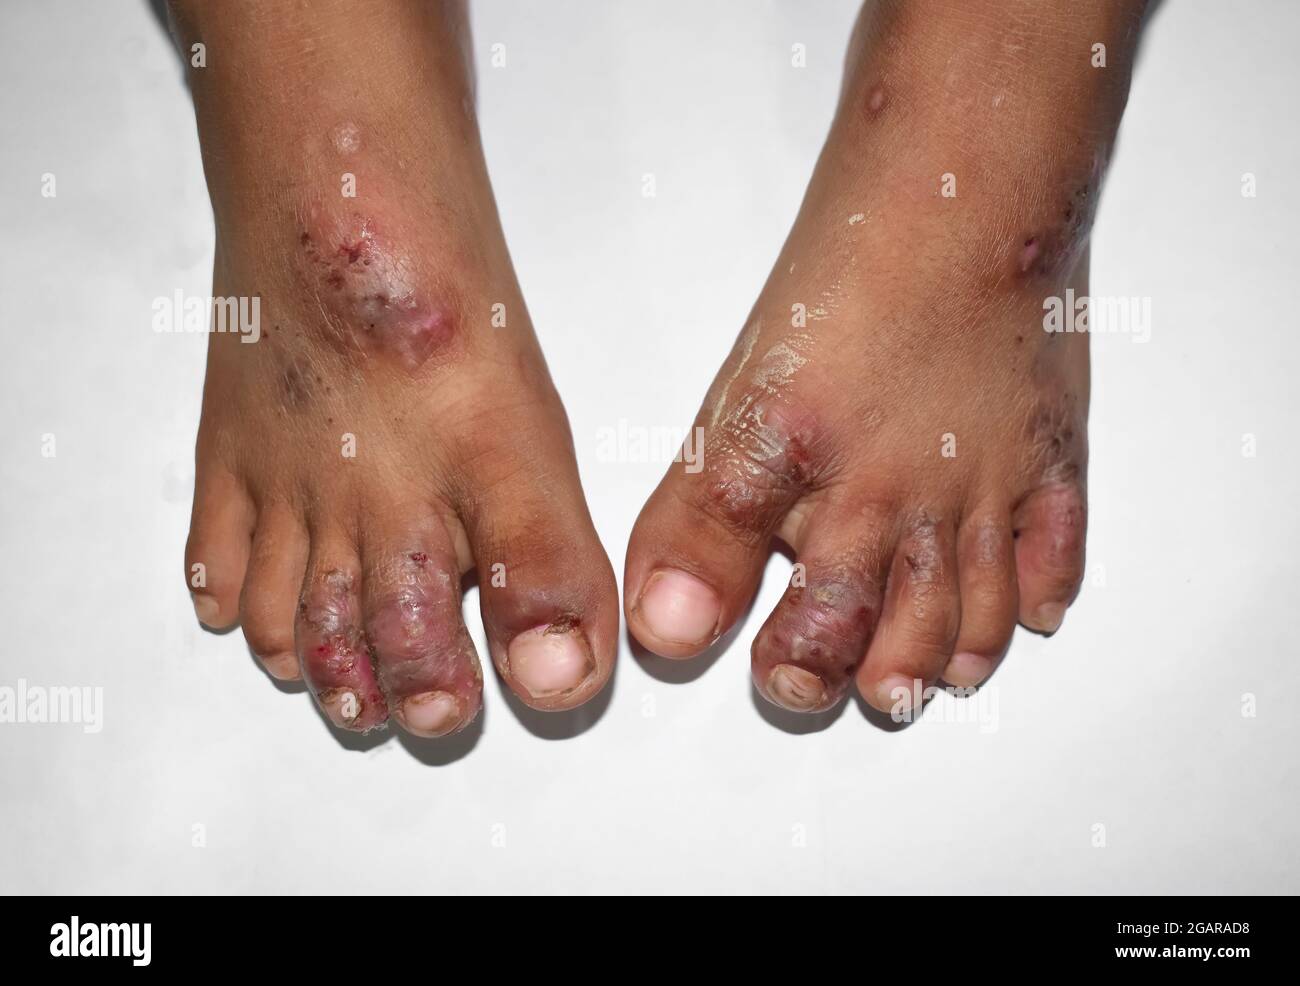 Scabies Infestation with secondary or superimposed bacterial infection and pustules in foot of Southeast Asian, Burmese baby. A contagious skin condit Stock Photo